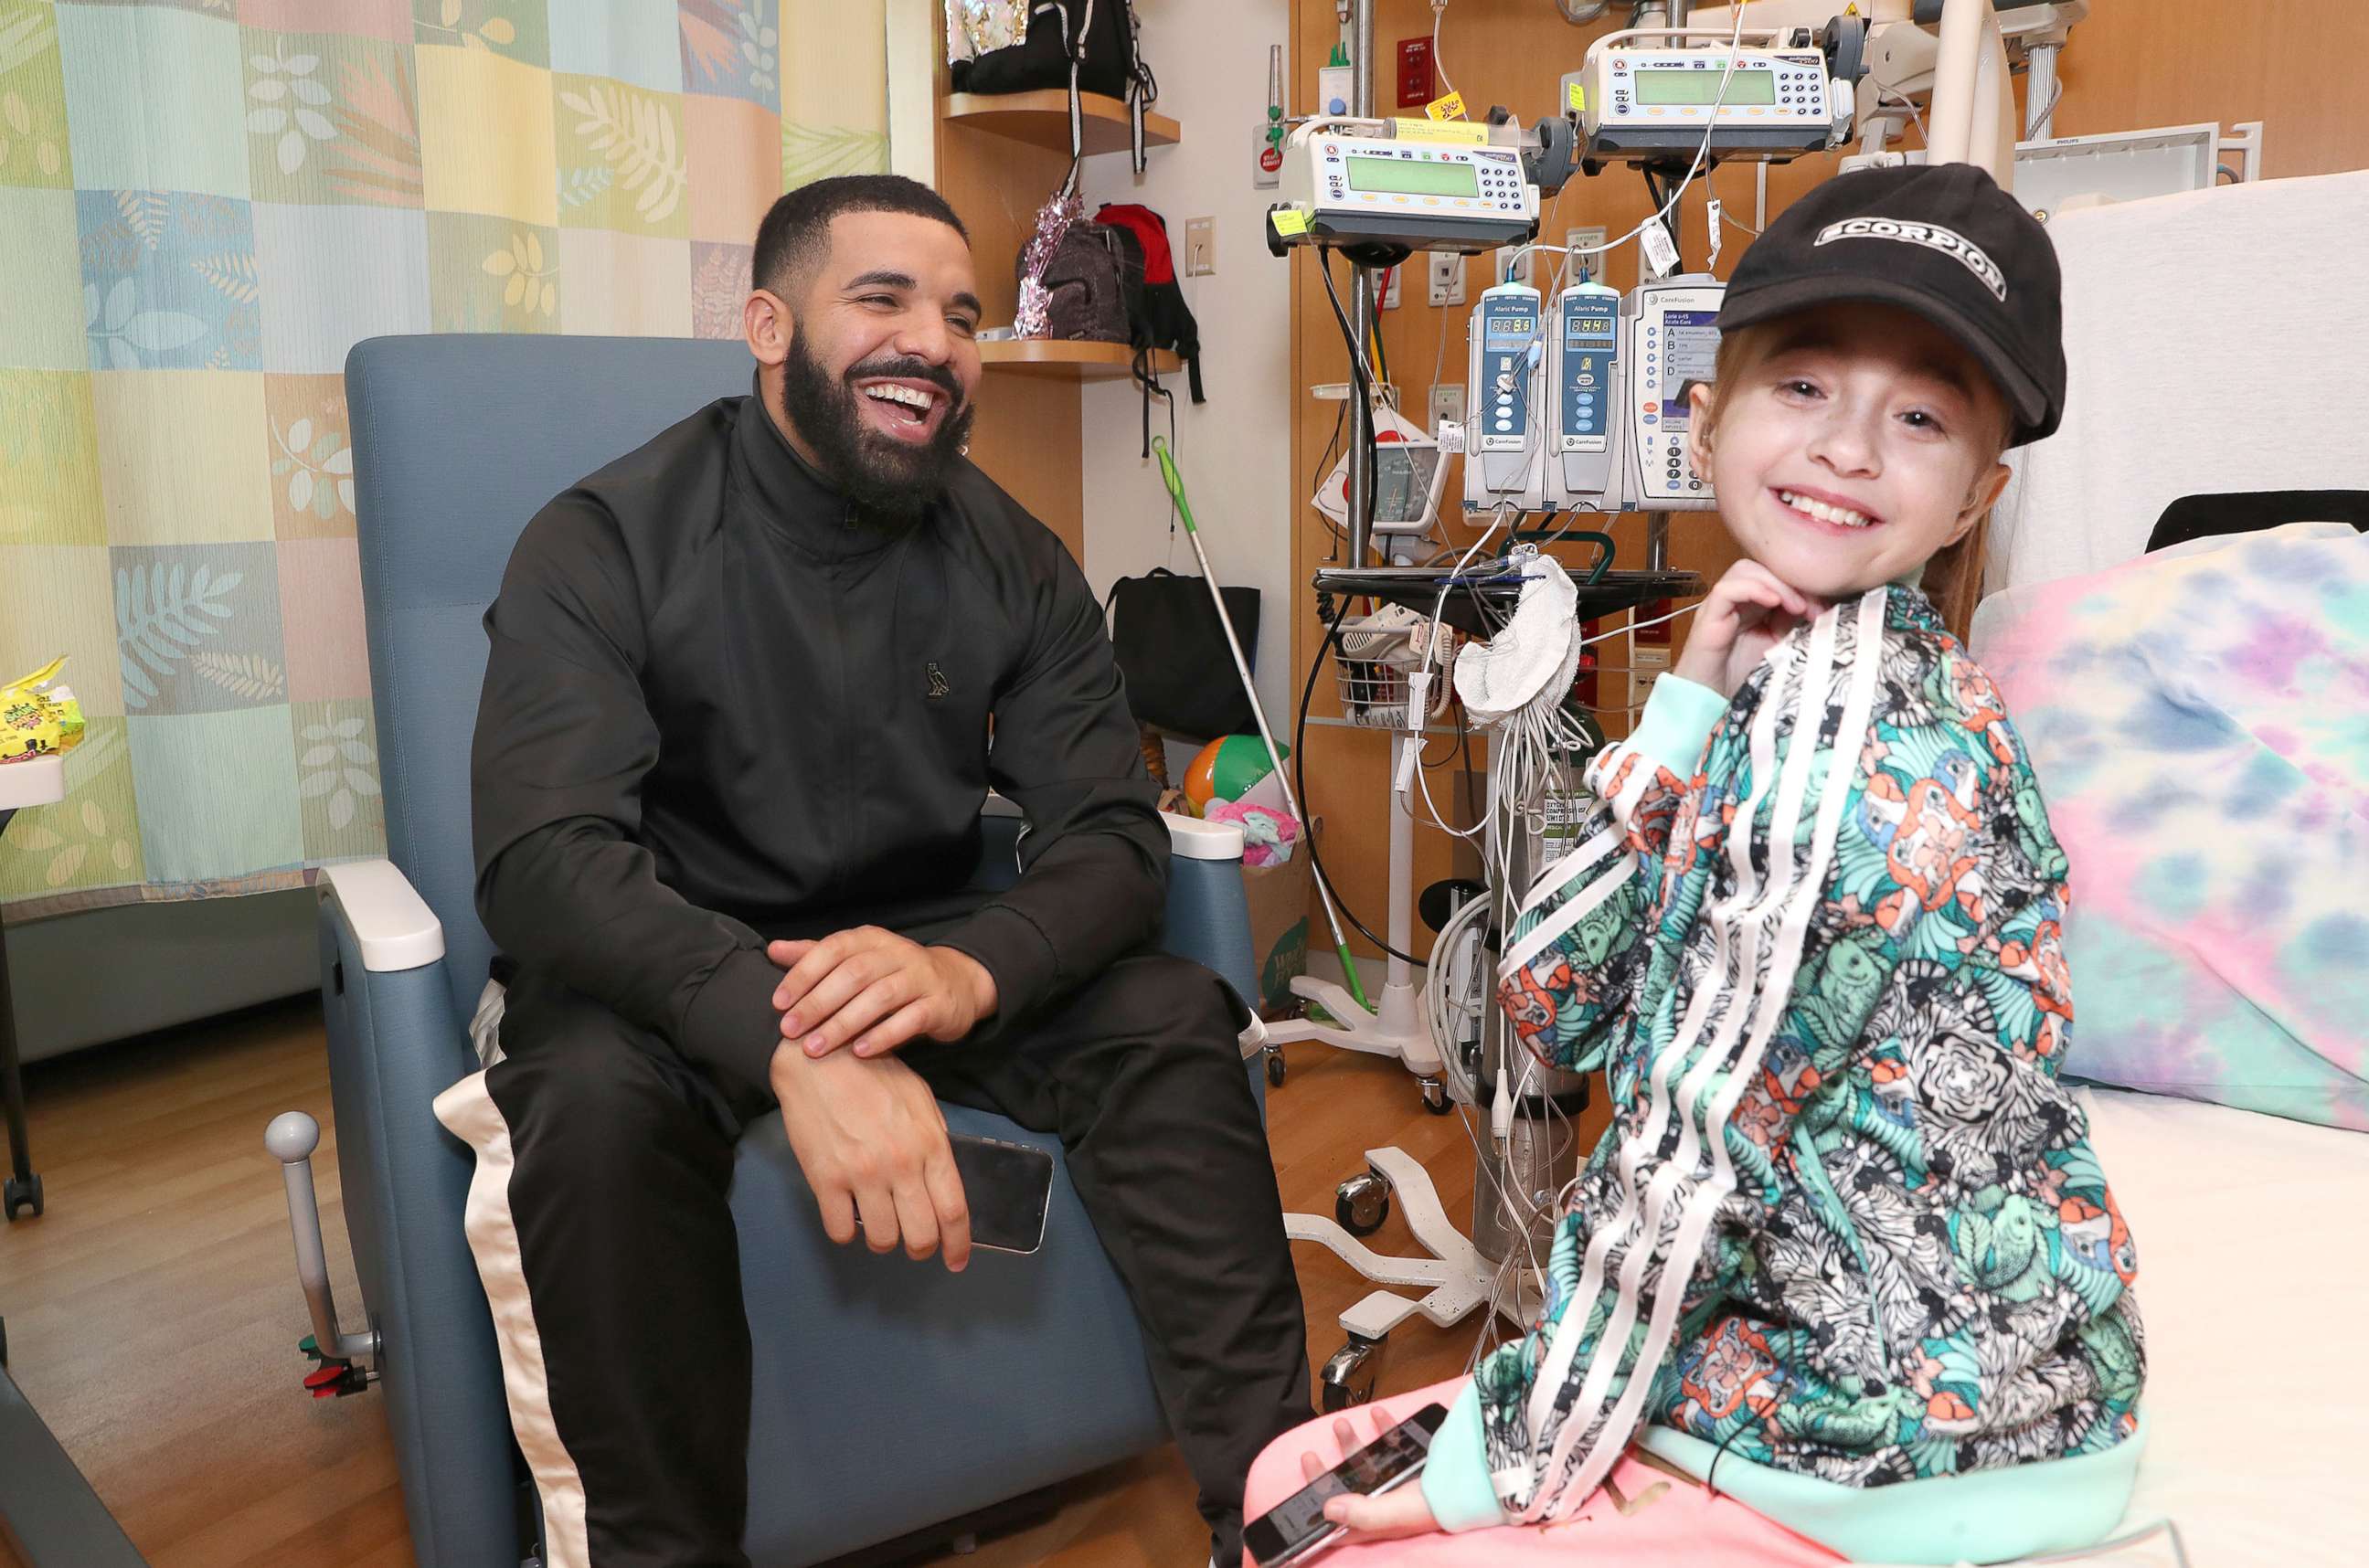 PHOTO: Sofia Sanchez poses with Drake during their visit at the Ann & Robert H. Lurie Children's Hospital of Chicago.